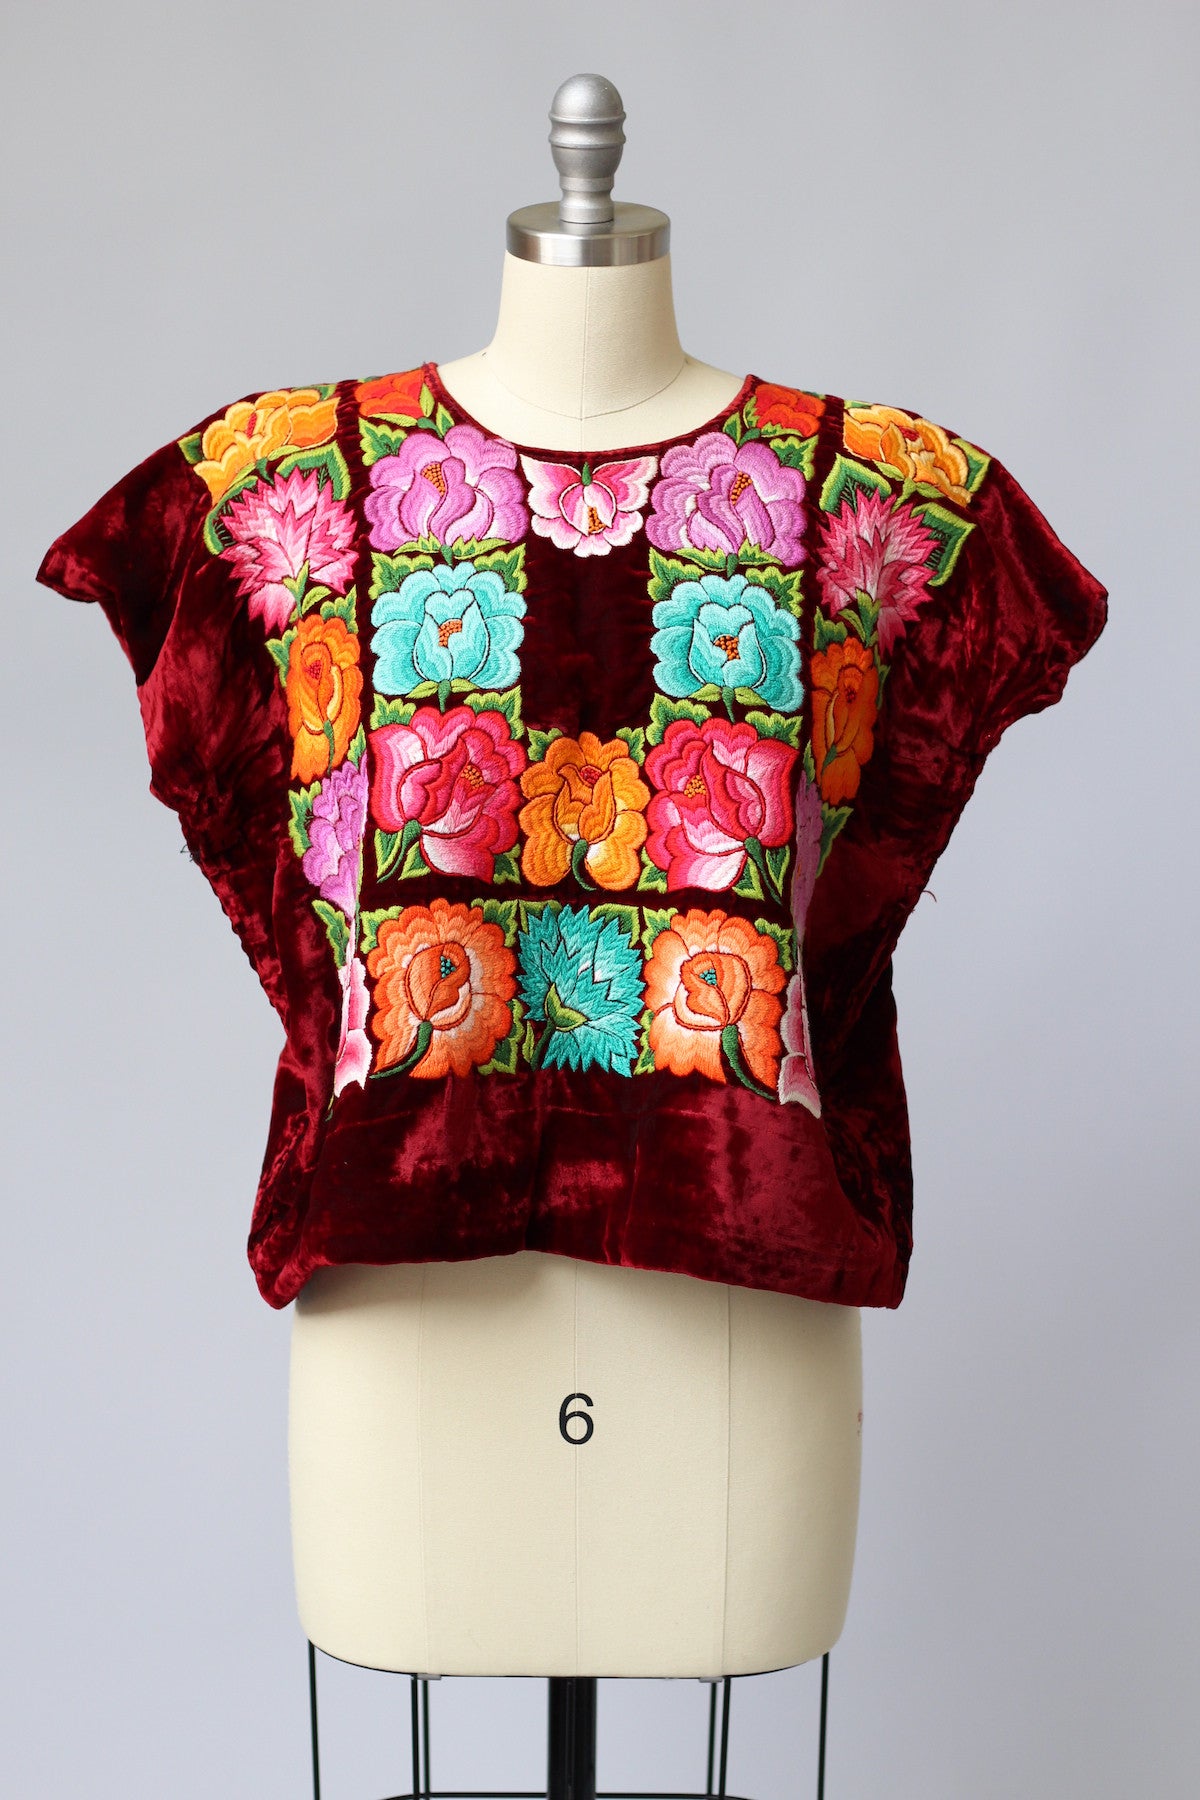 Rare Vintage Tehuantepec Mexico Embroidered Huipil Blouse Burgundy